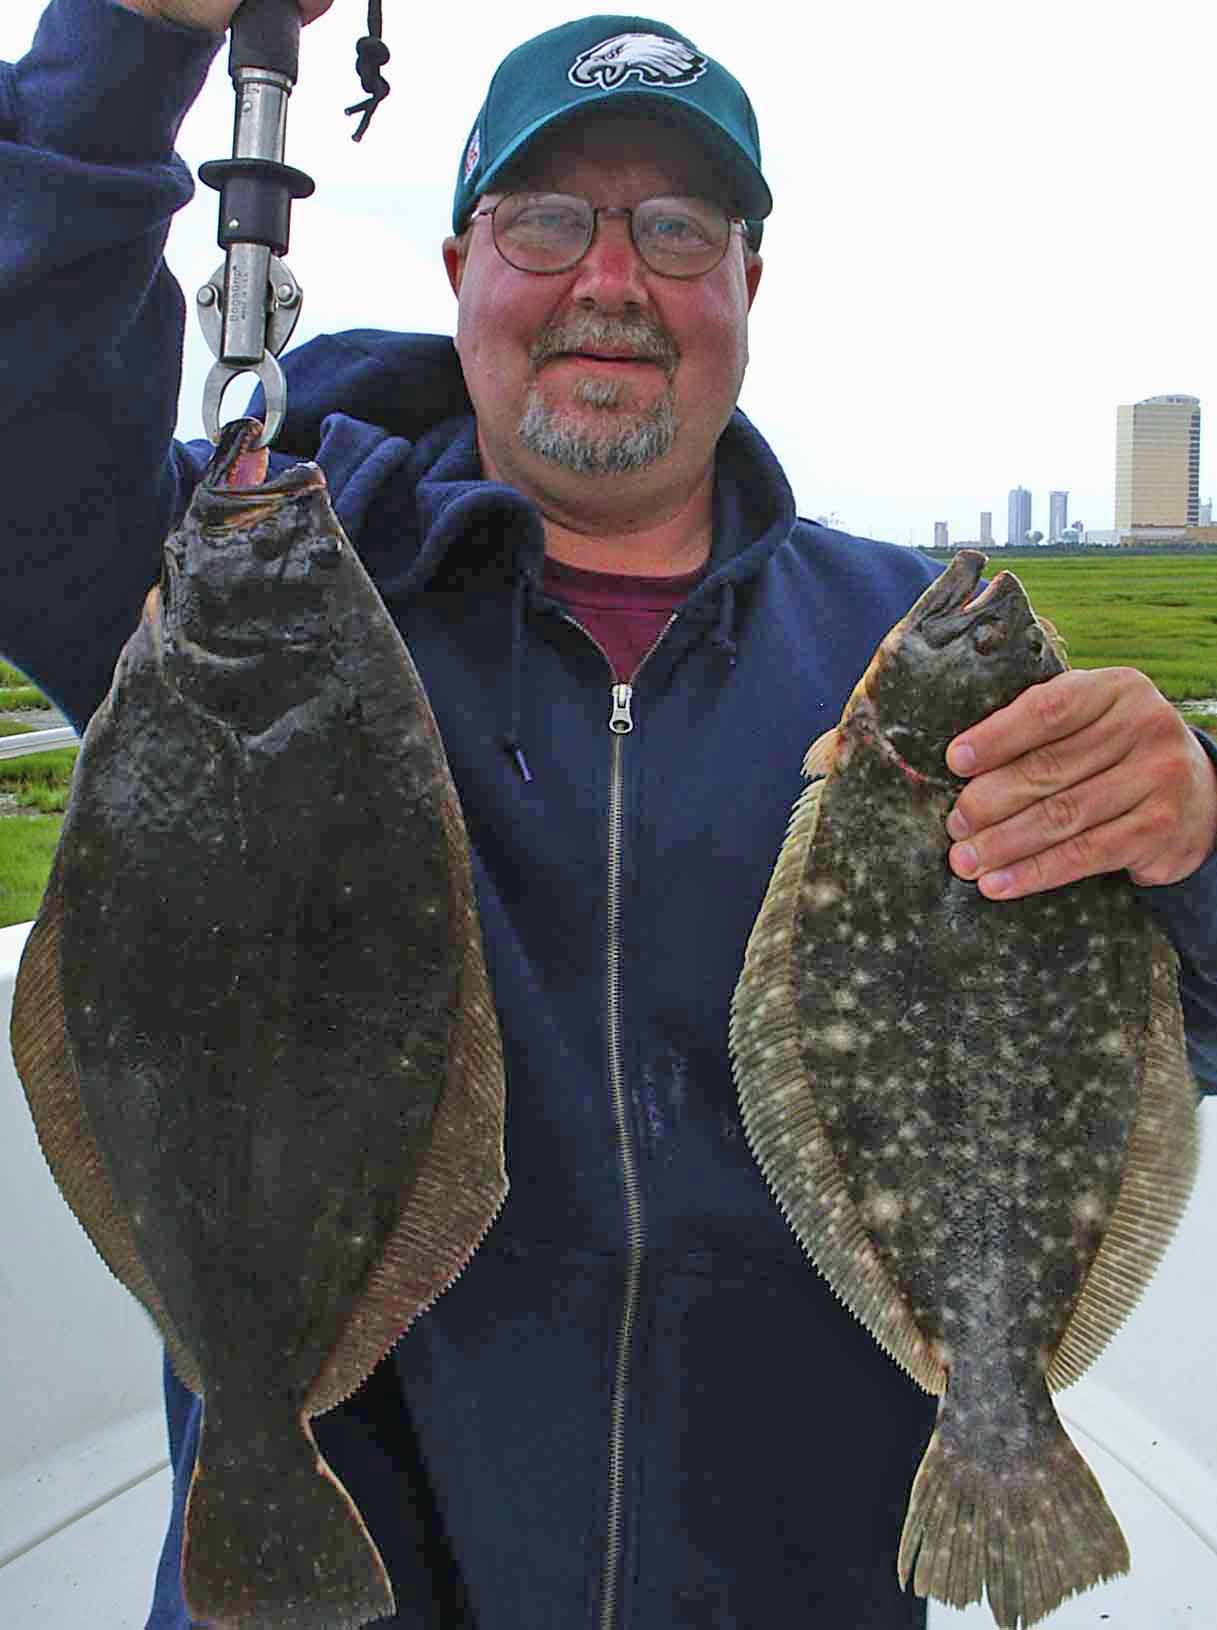 Catch lots of flounder in the waters near Atlantic City and Brigantine!